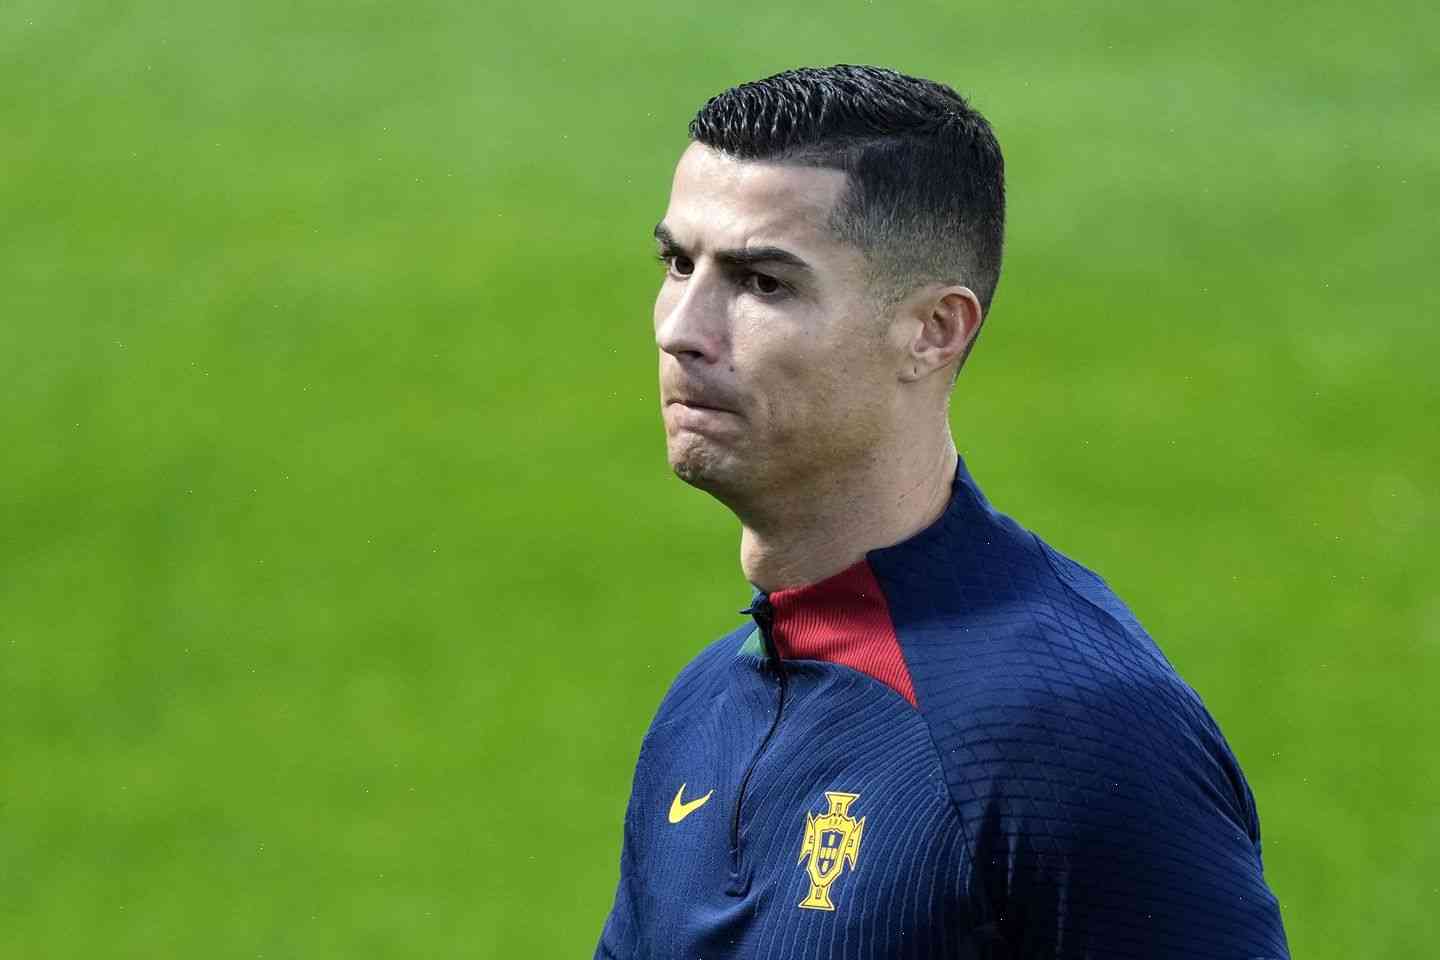 Ronaldo to leave Old Trafford as he embarks on £150 million move to Real Madrid